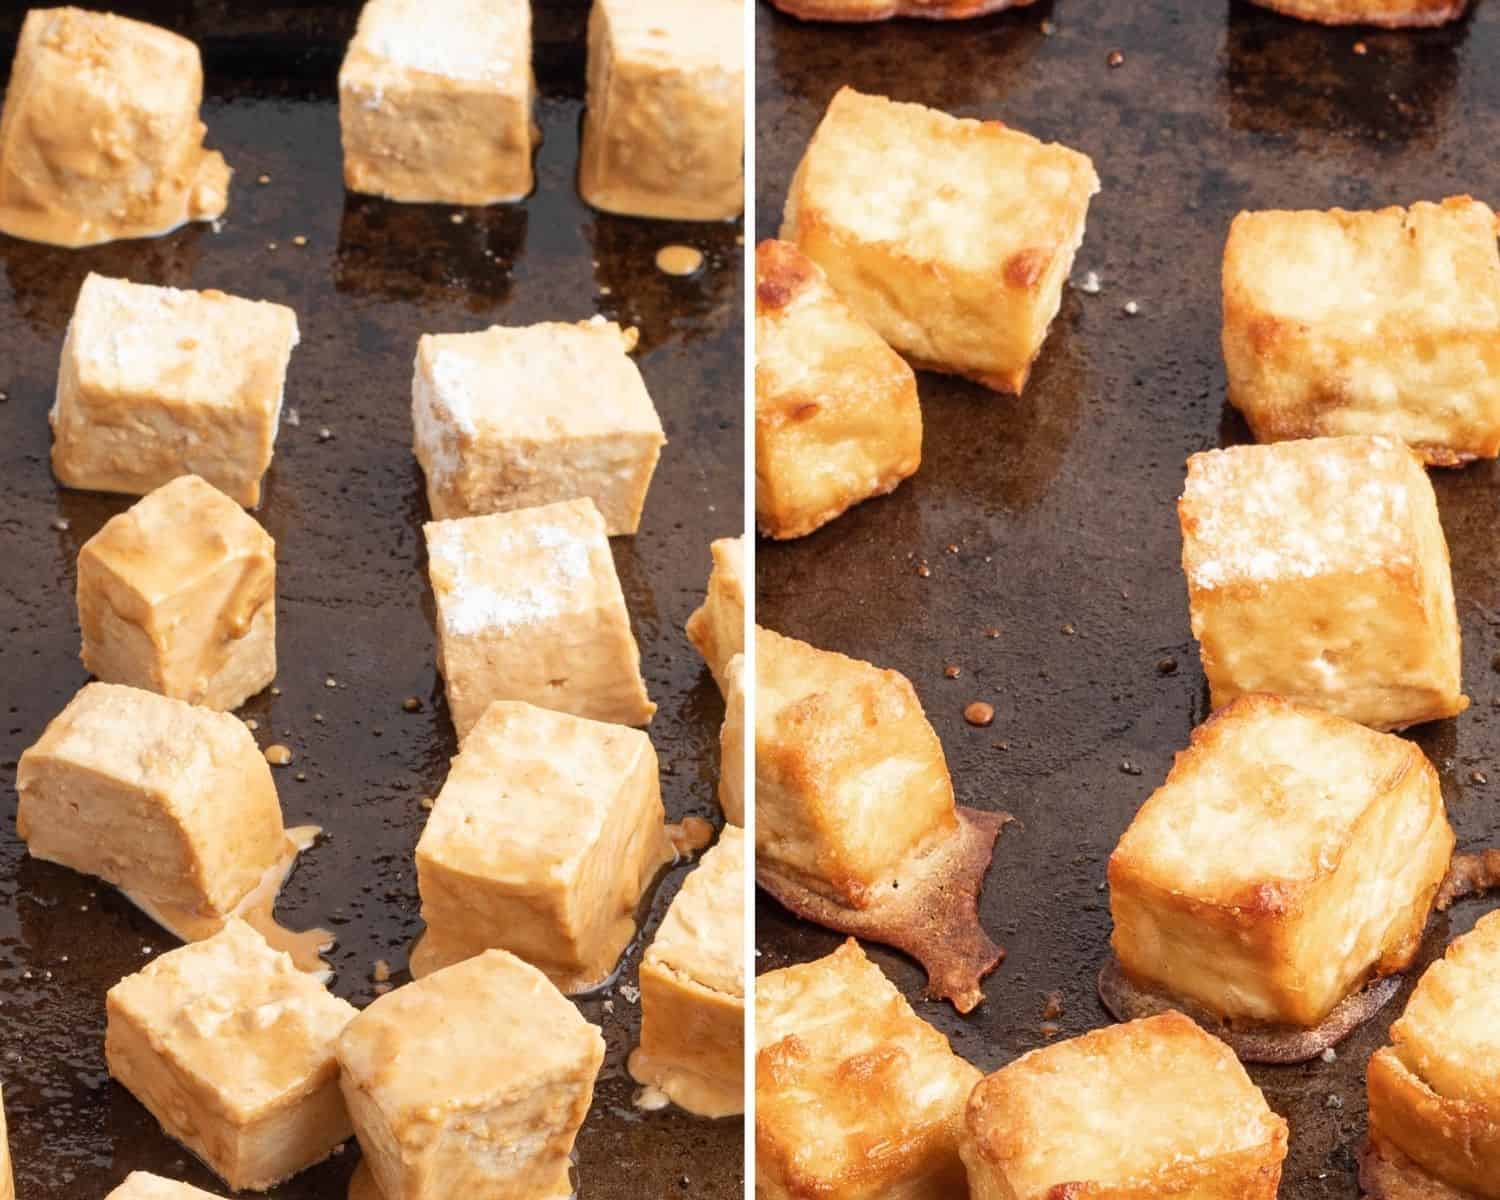 Tofu before and after baking.